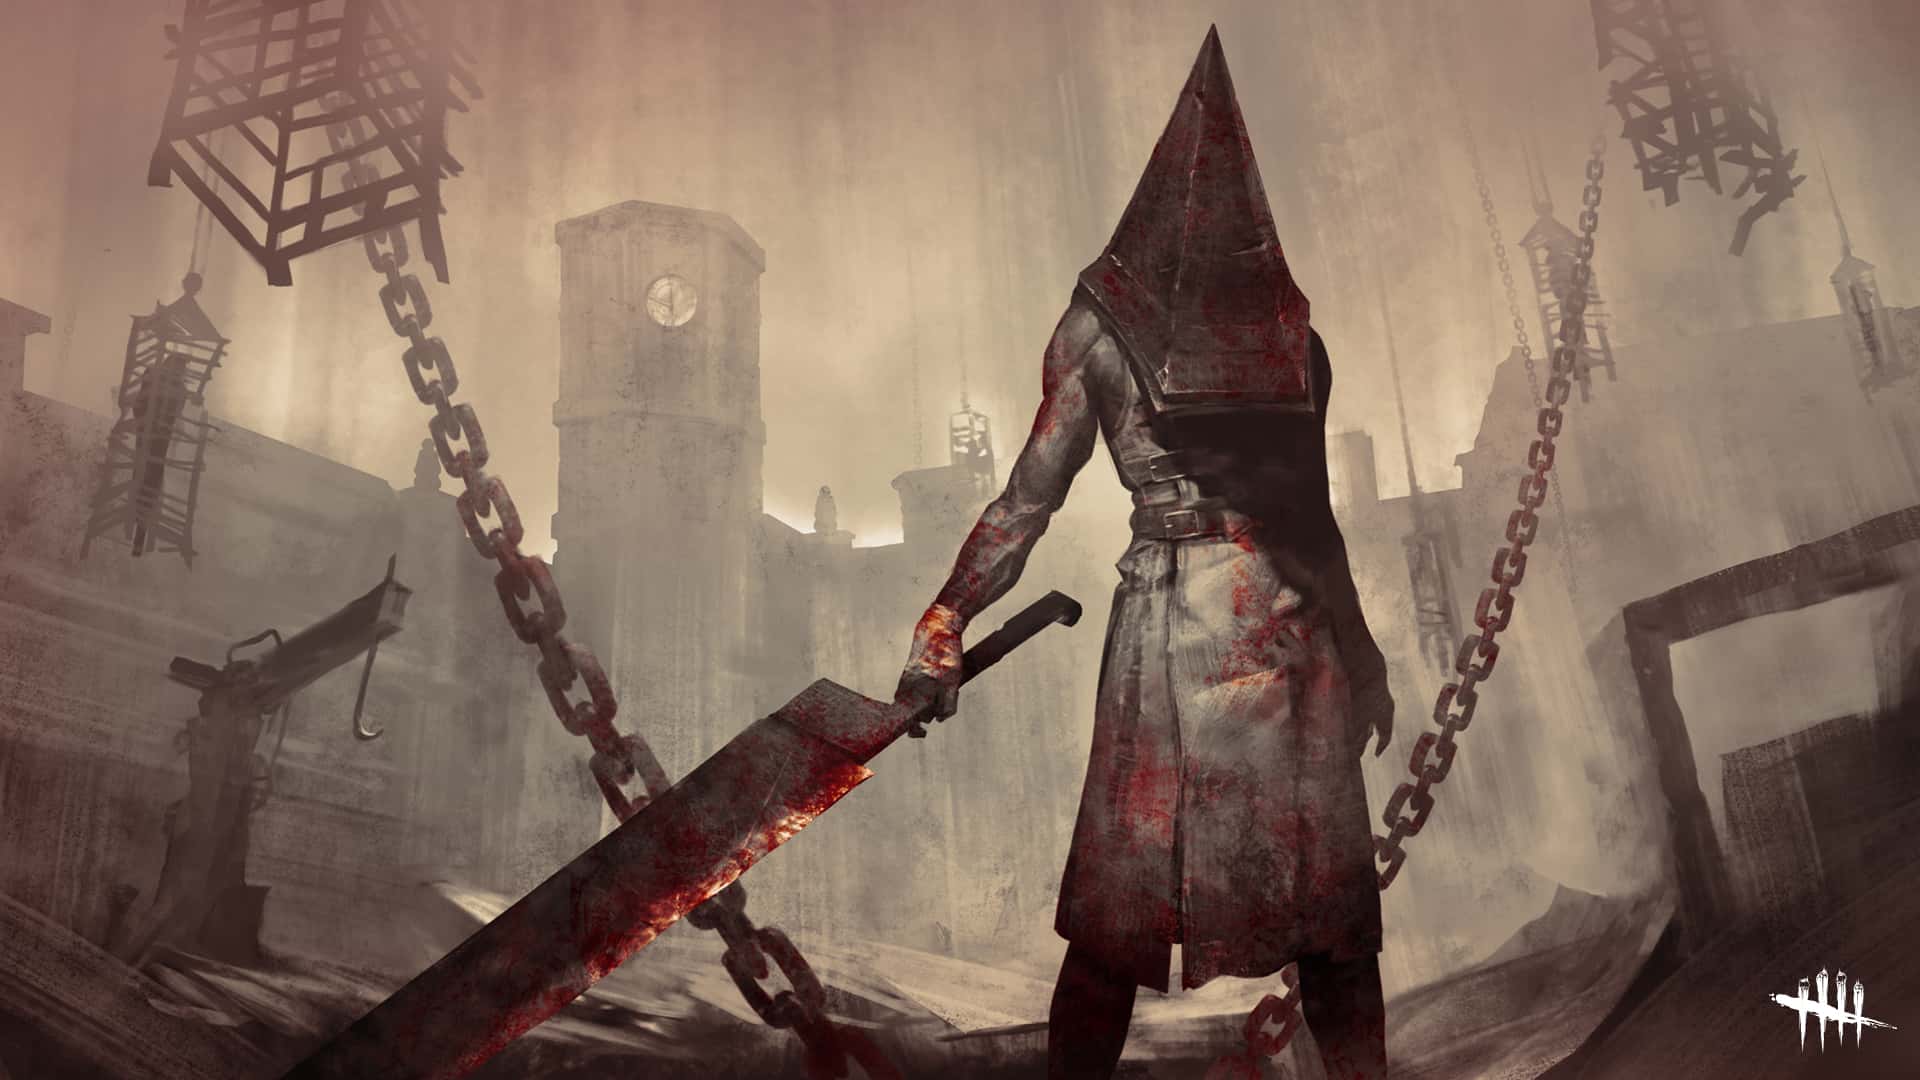 Dead By Daylight Update 1.94 Patch Notes - Silent Hill Crossover Now